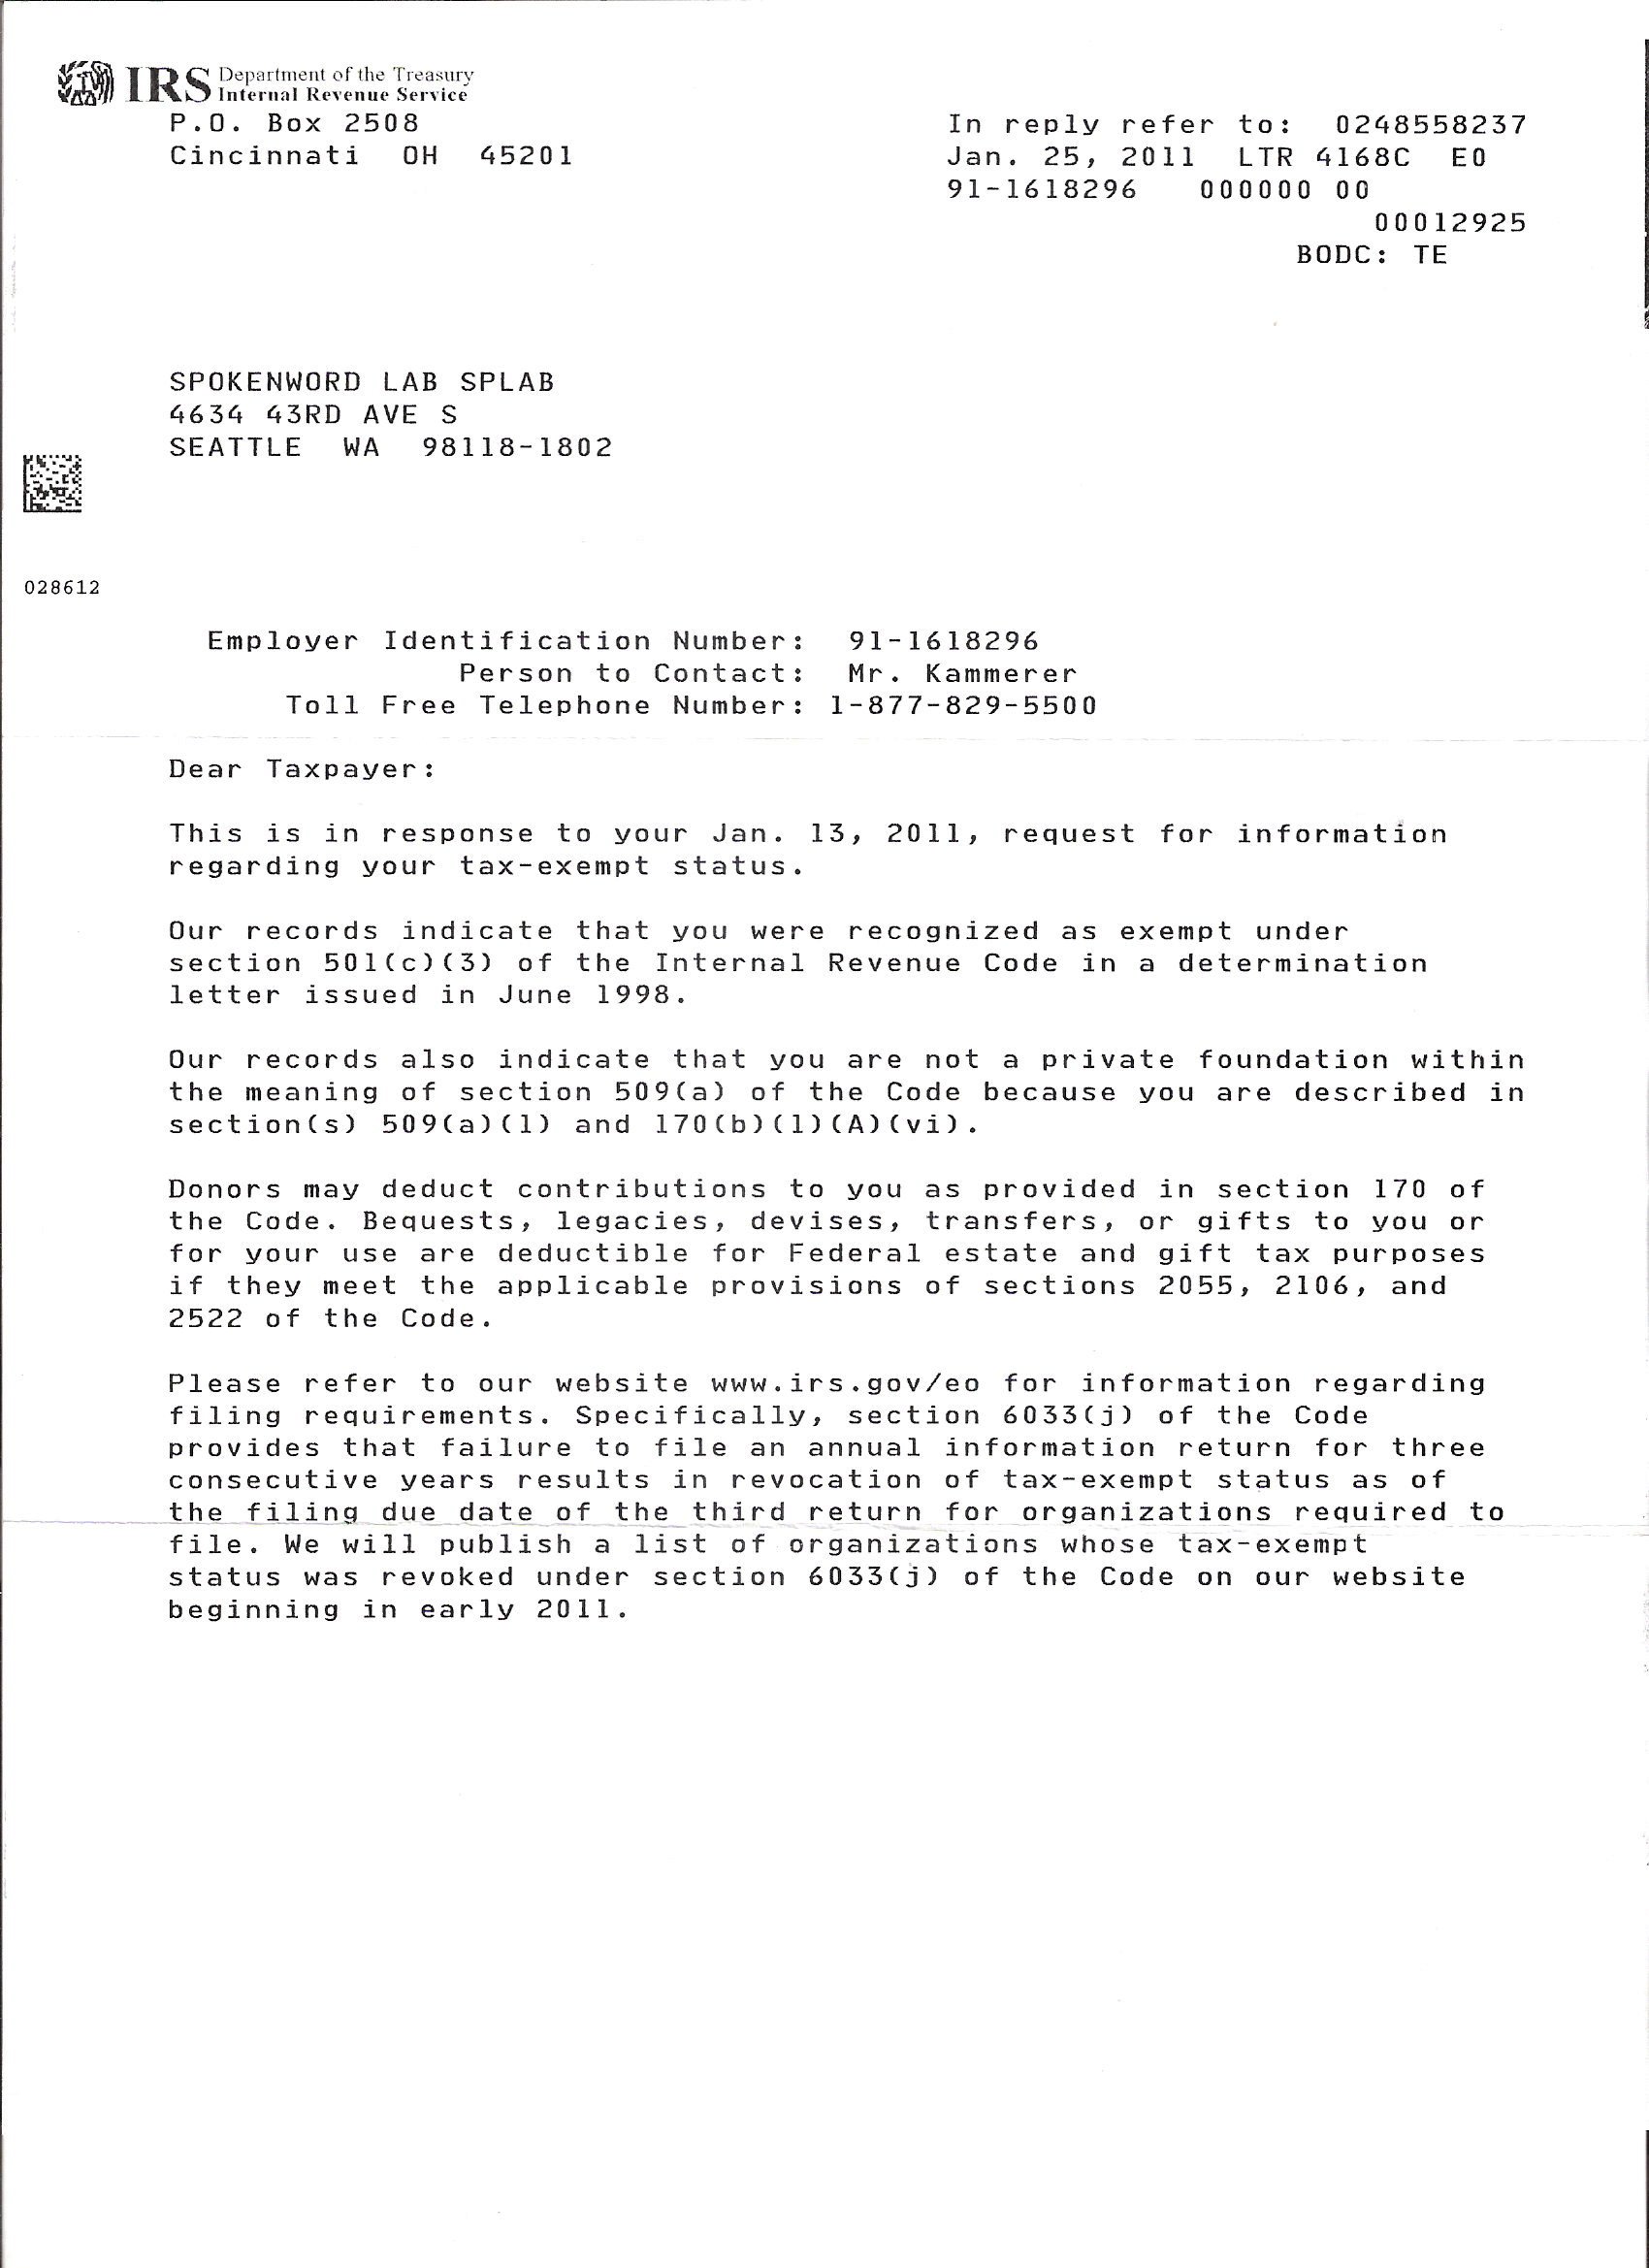 IRS Determination Letter 1.25.11